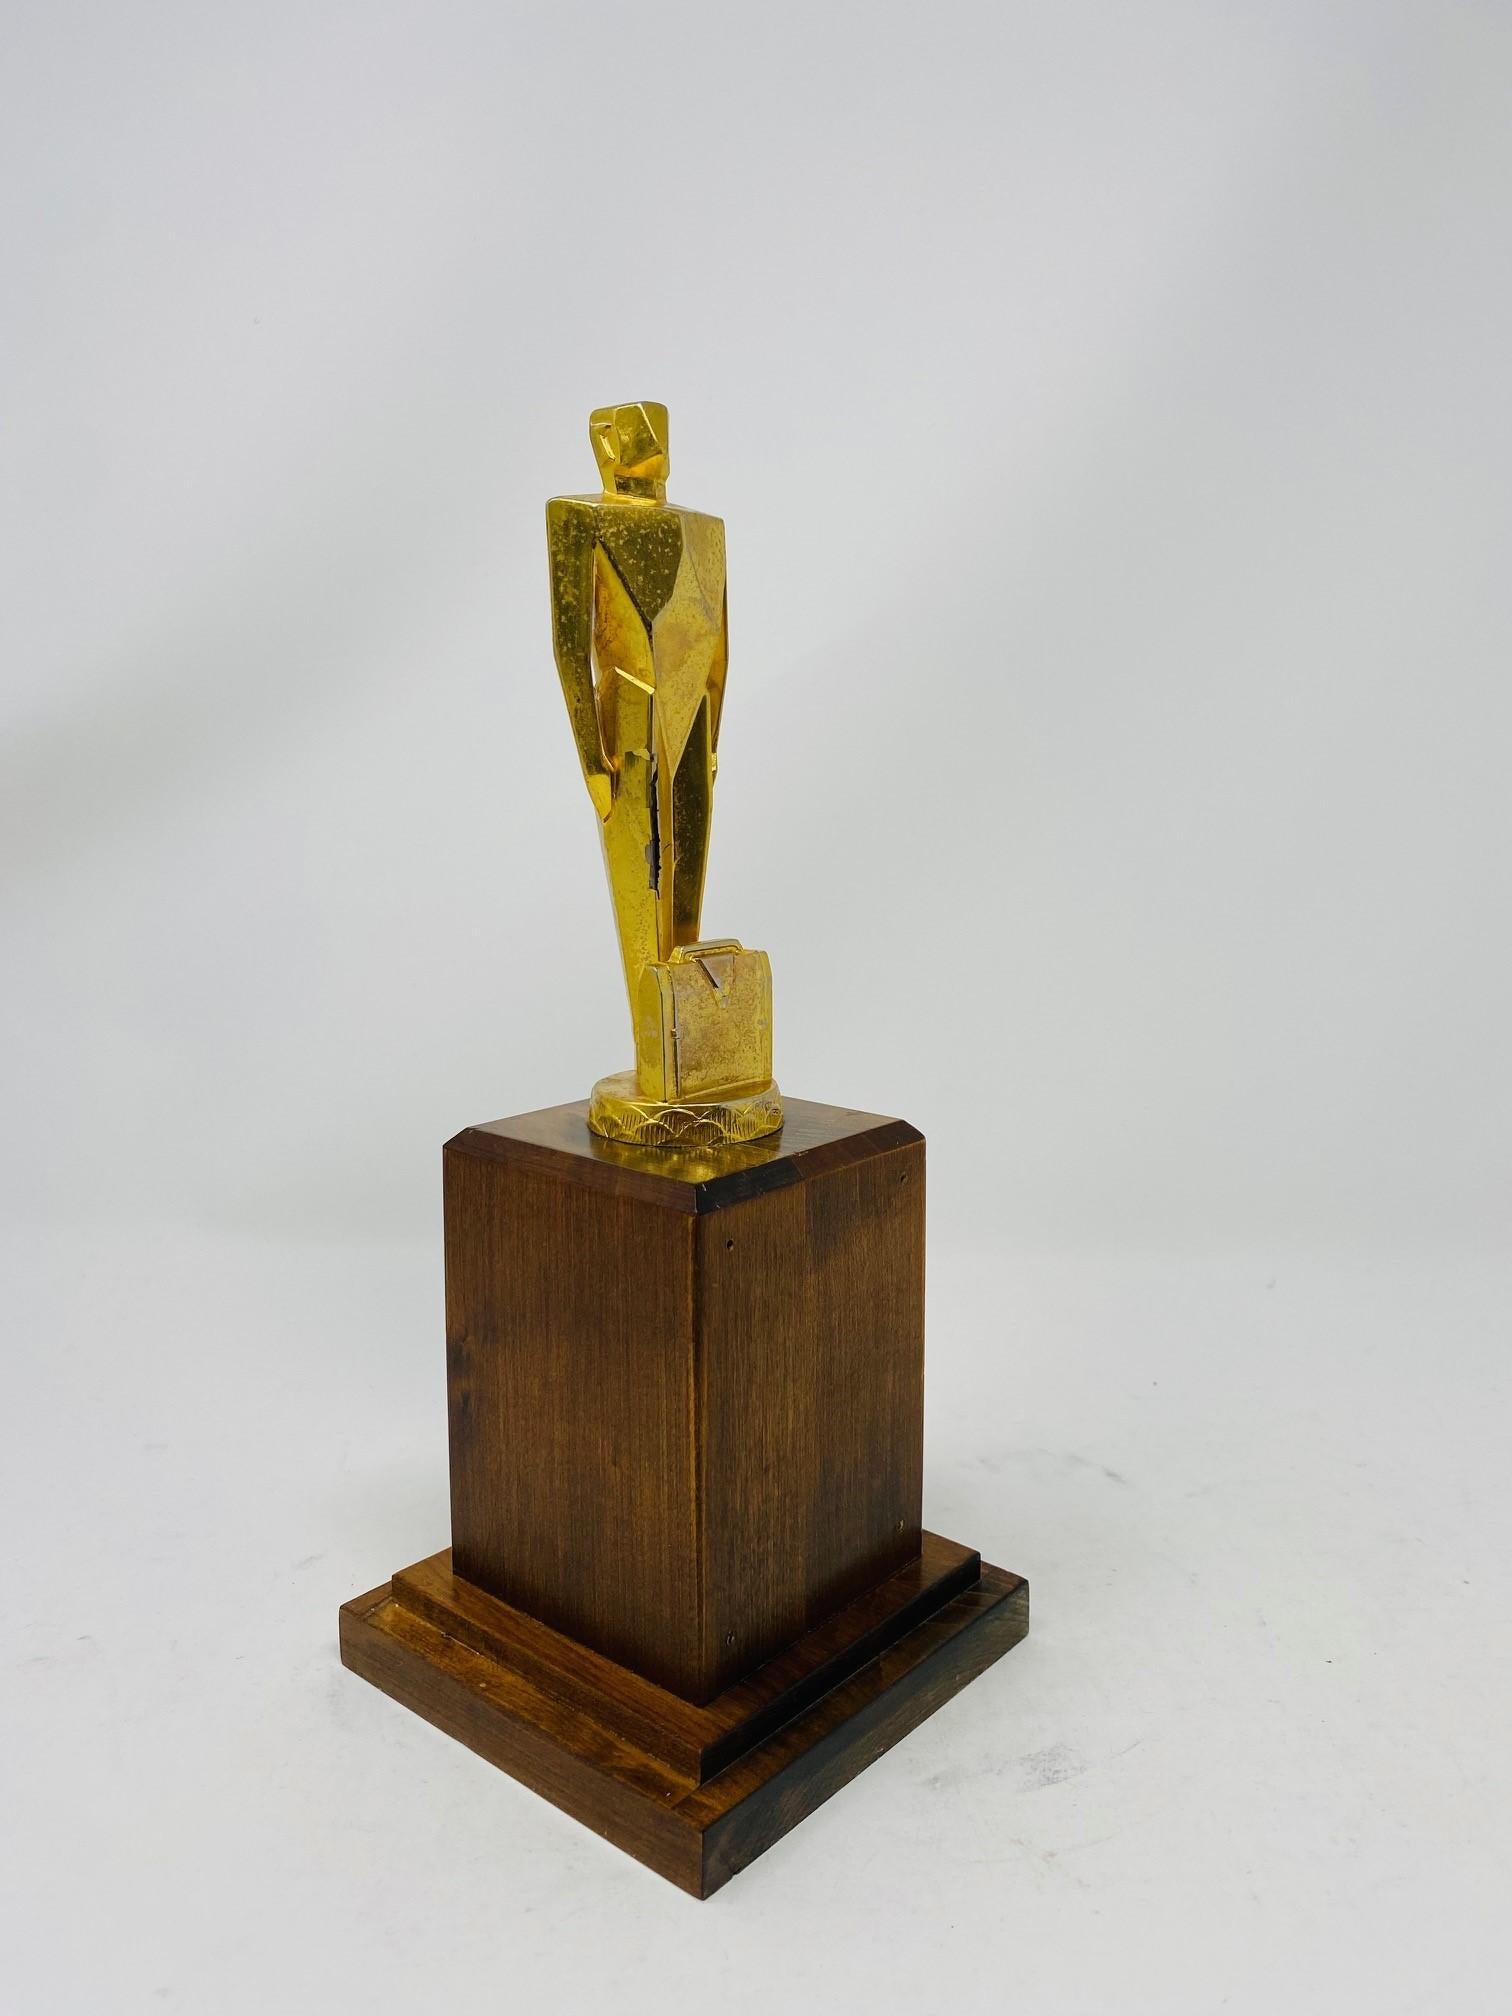 Beautiful and unique art deco trophy sculpture.  These trophy sculptures were made from the 30's to the early 60's and were given as recognition for sales executives.  These are rare and this one belongs to the original cast creations.  The figure